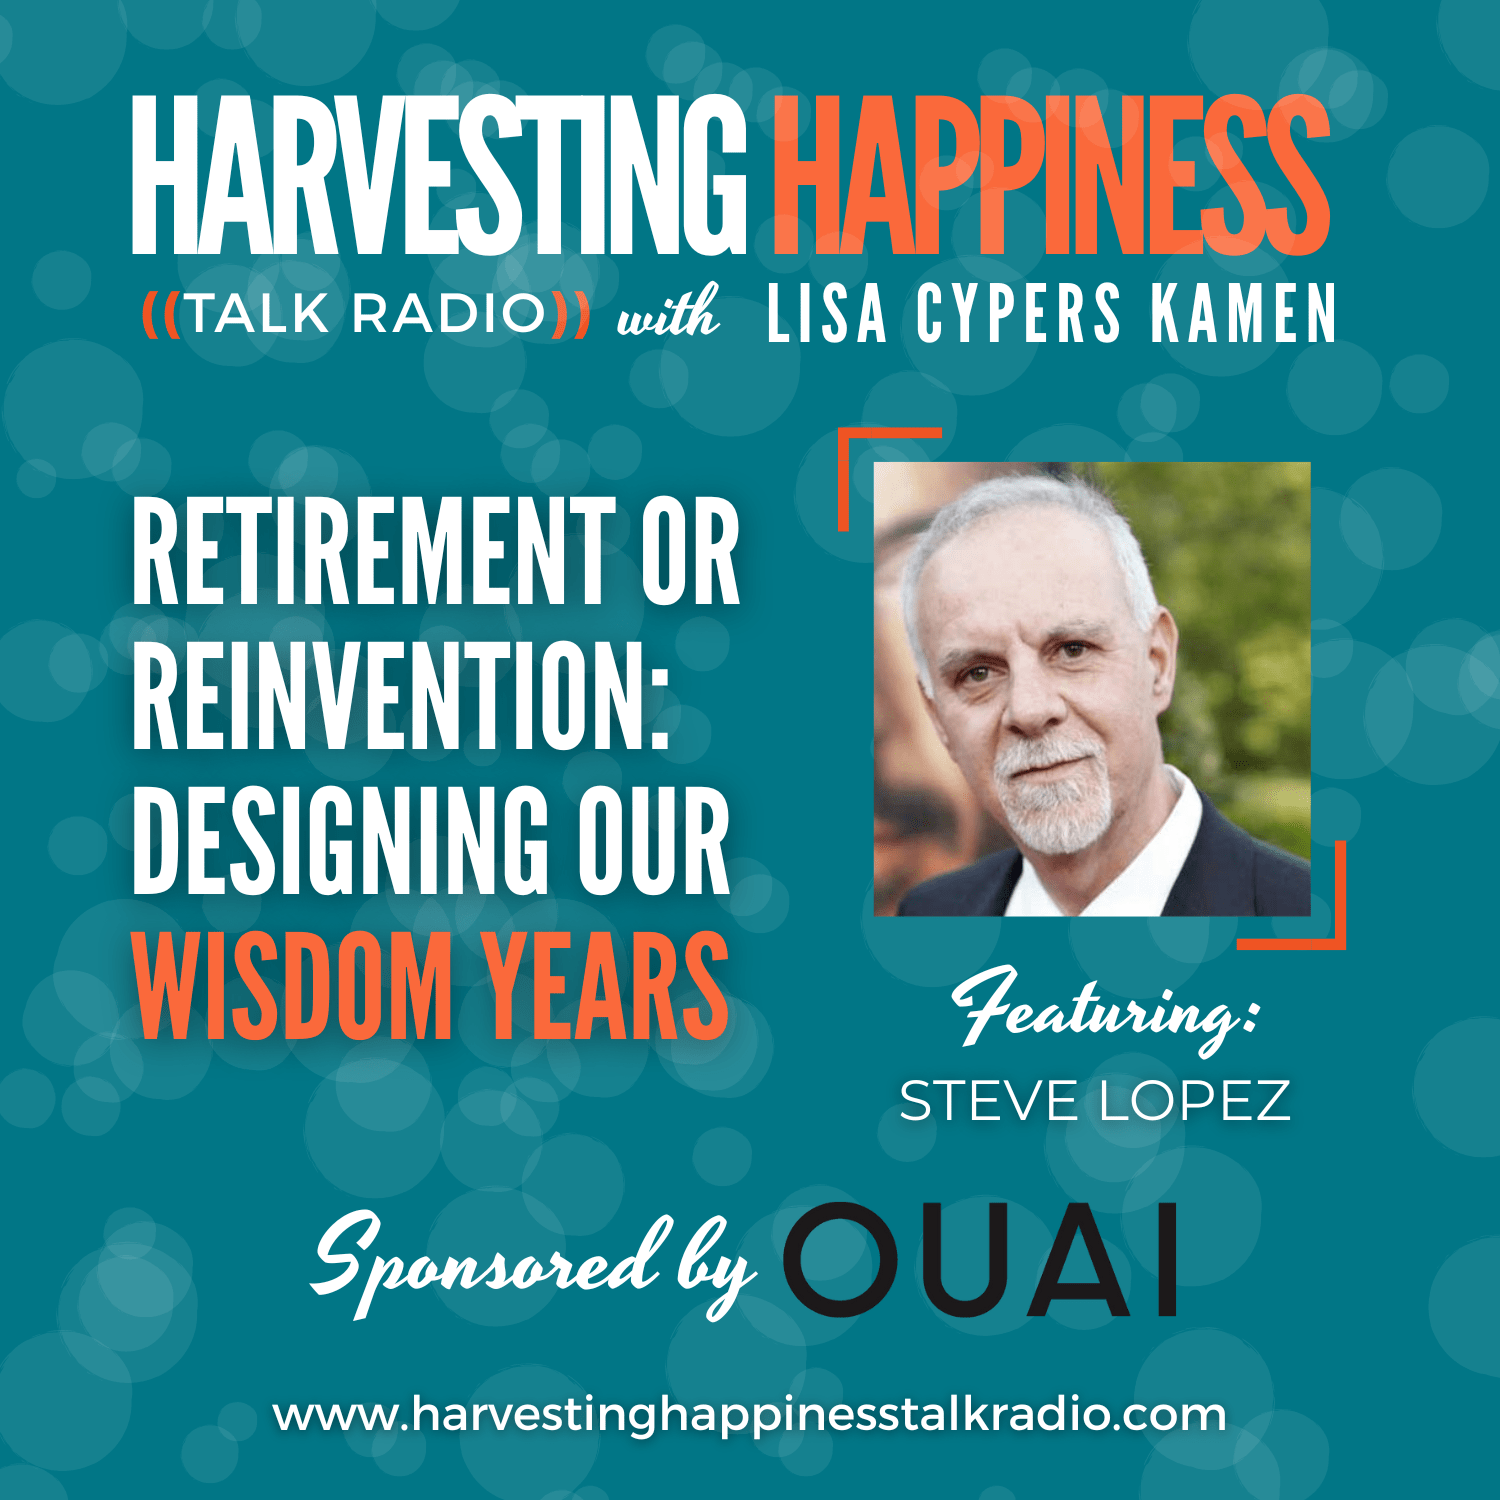 Podcast about retirement and the wisdom years with steve lopez, sponsored by OUAI